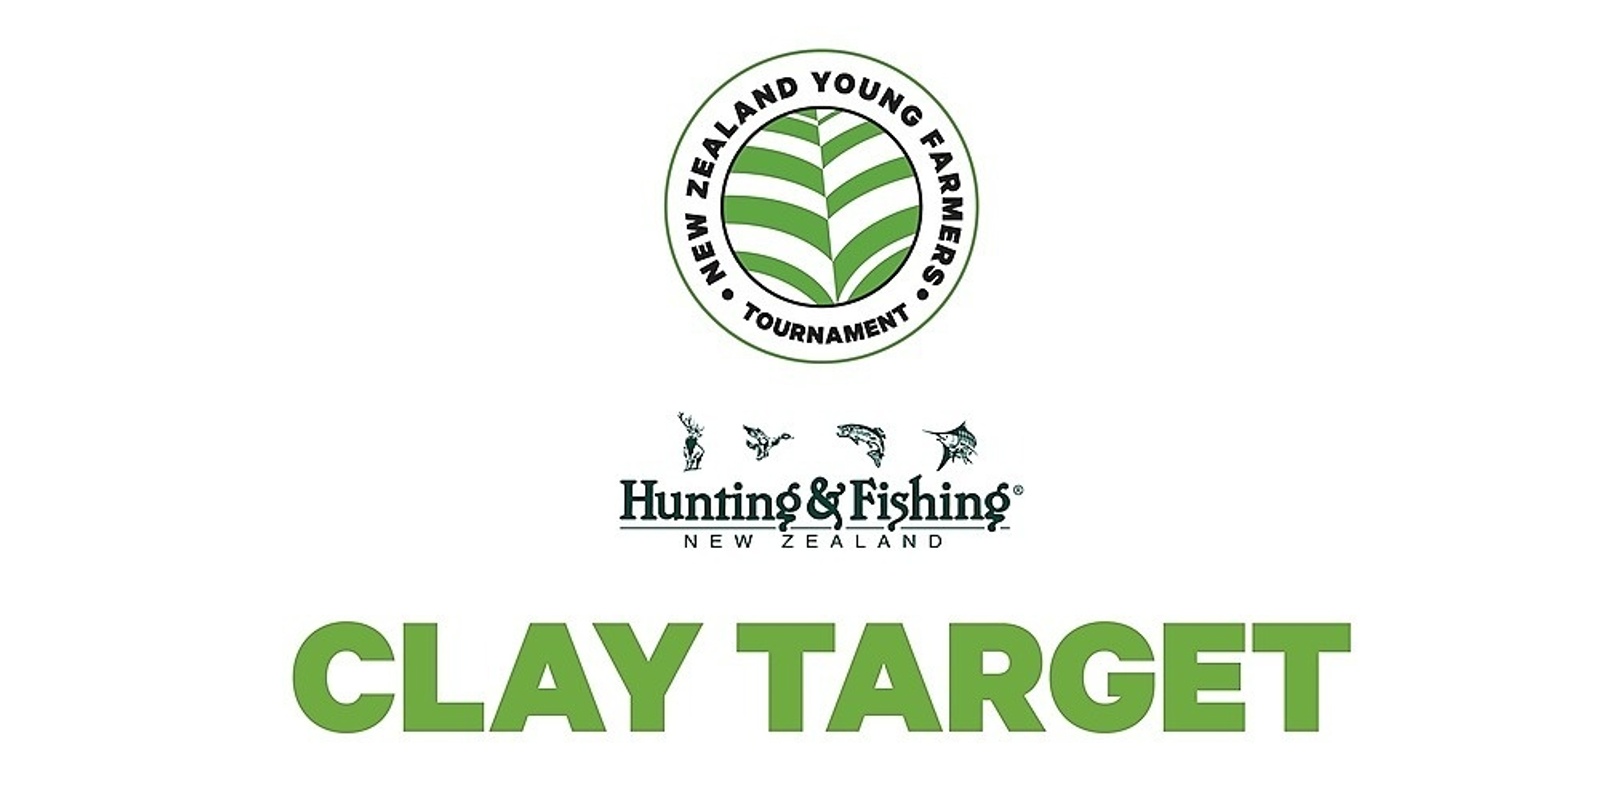 Banner image for NZ Young Farmers Tournament - Hunting & Fishing Clay Target 